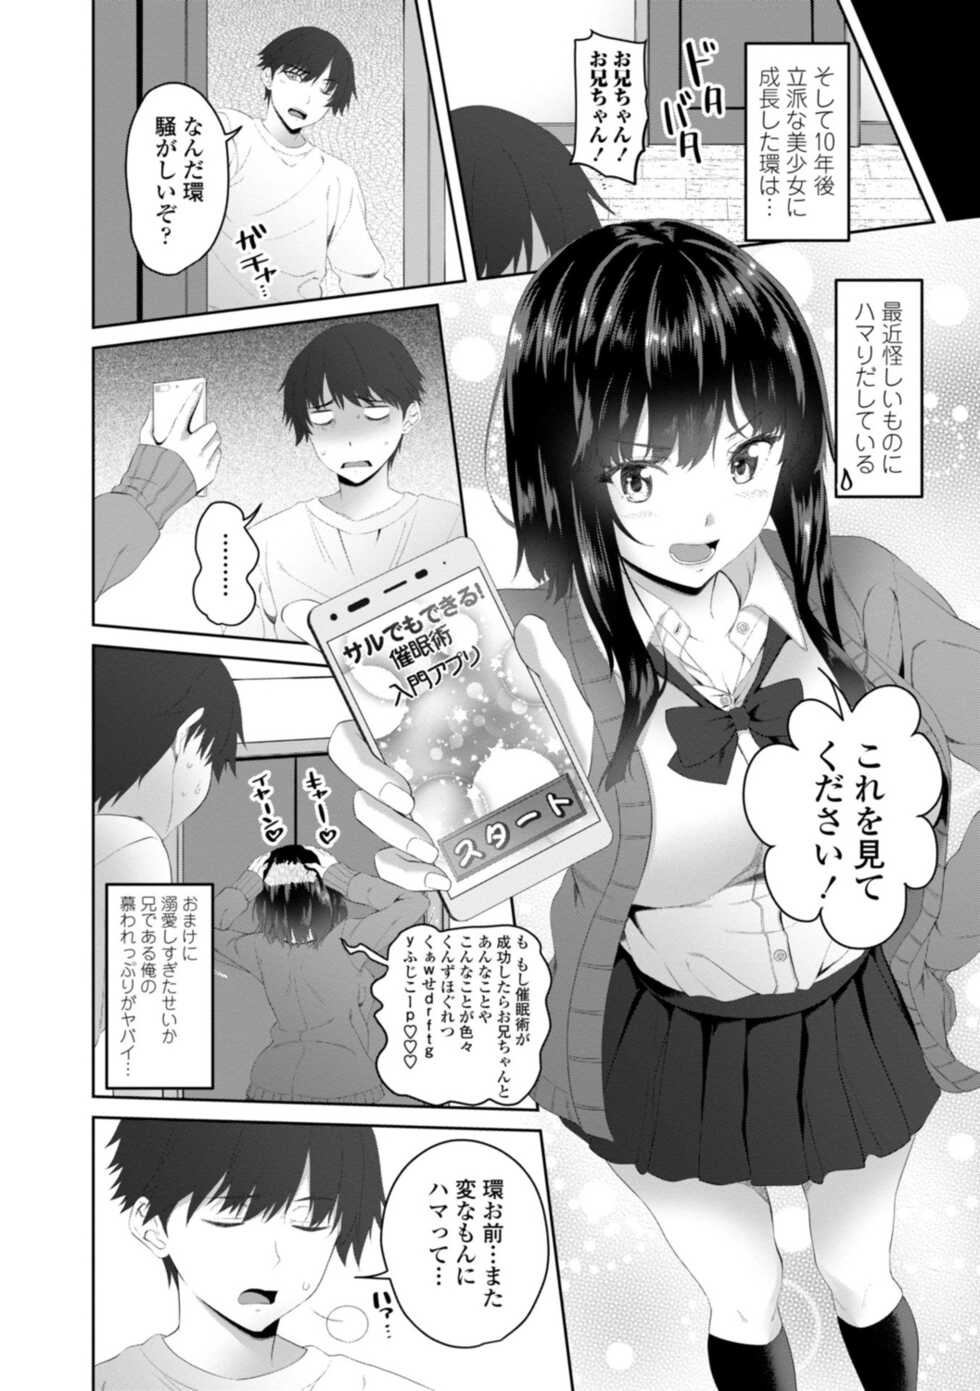 [Arsenal] Onii-chan no H na Otoshikata - How to make your brother like you for sex. [Digital] - Page 6